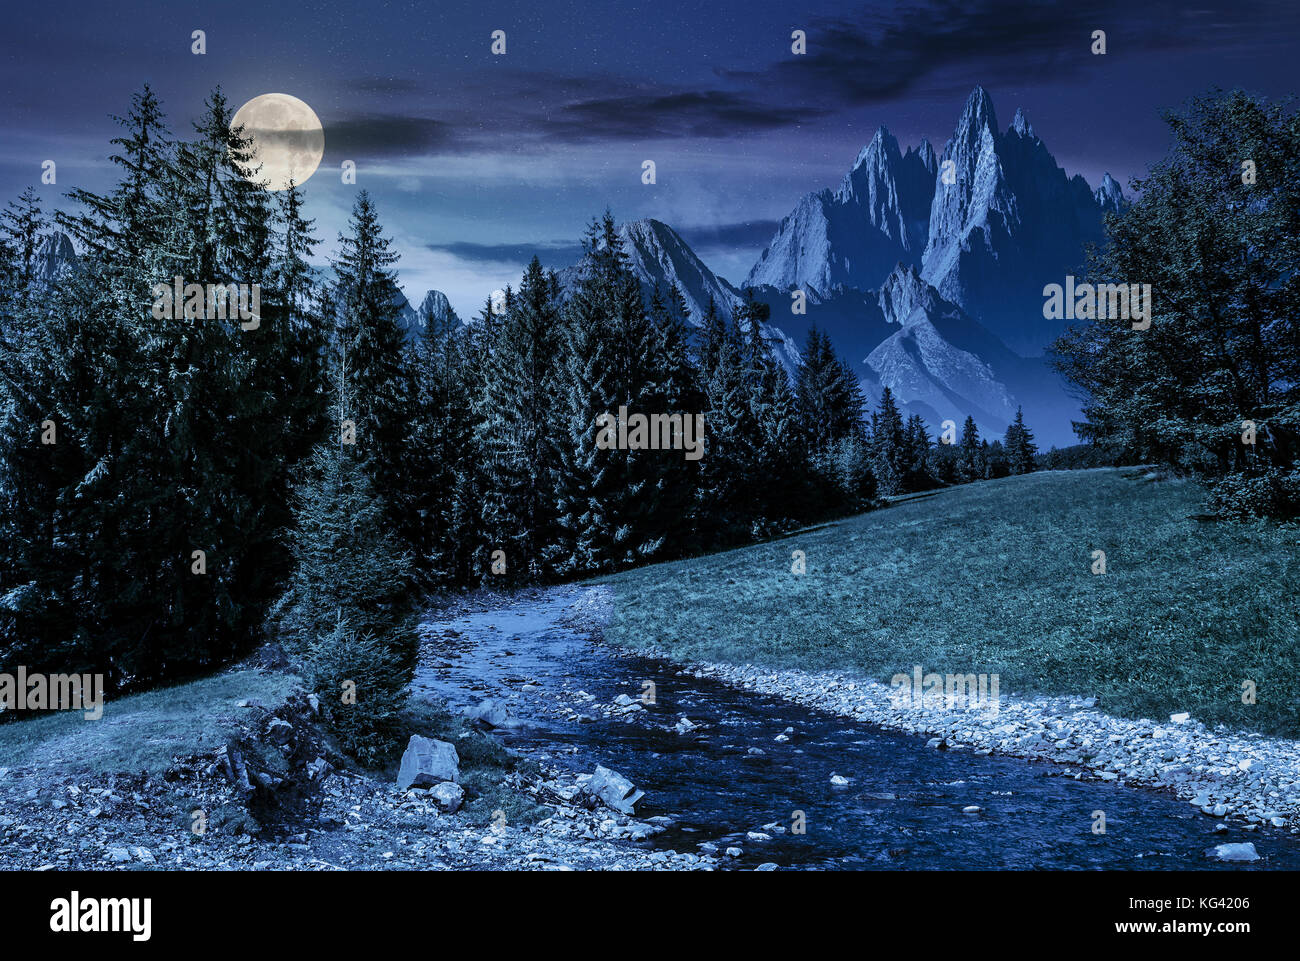 fairy tale mountainous summer landscape at night in full moon light. composite image with high rocky peaks above the mountain river in spruce forest Stock Photo